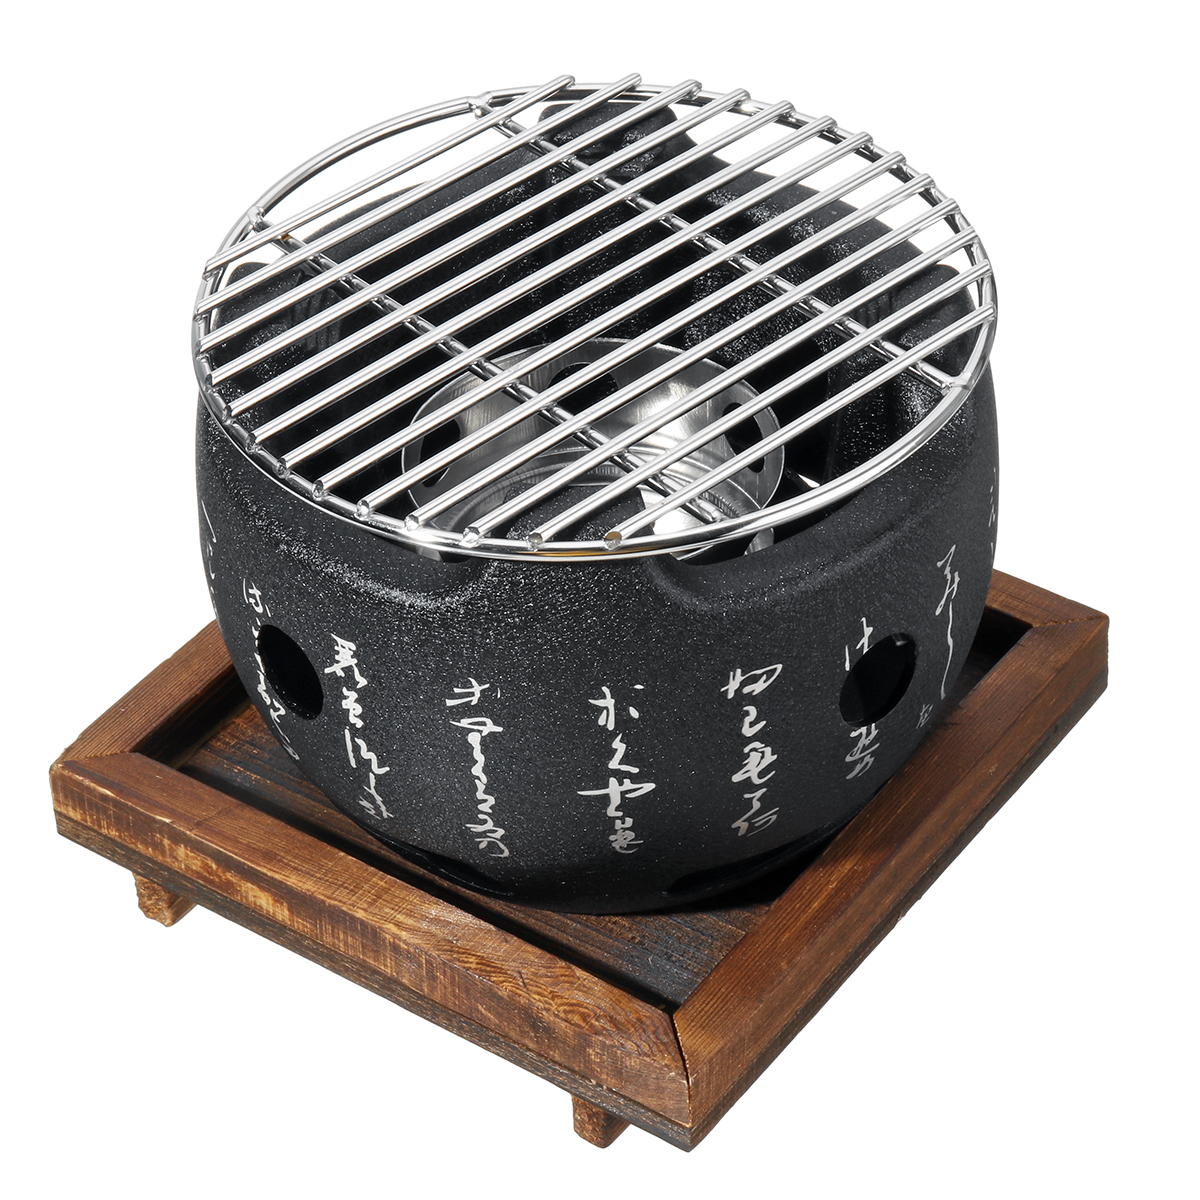 BBQ Grill Charcoal Grill Japanese Style Aluminium Alloy Portable Barbecue eddiestore2008 - image 4 of 11